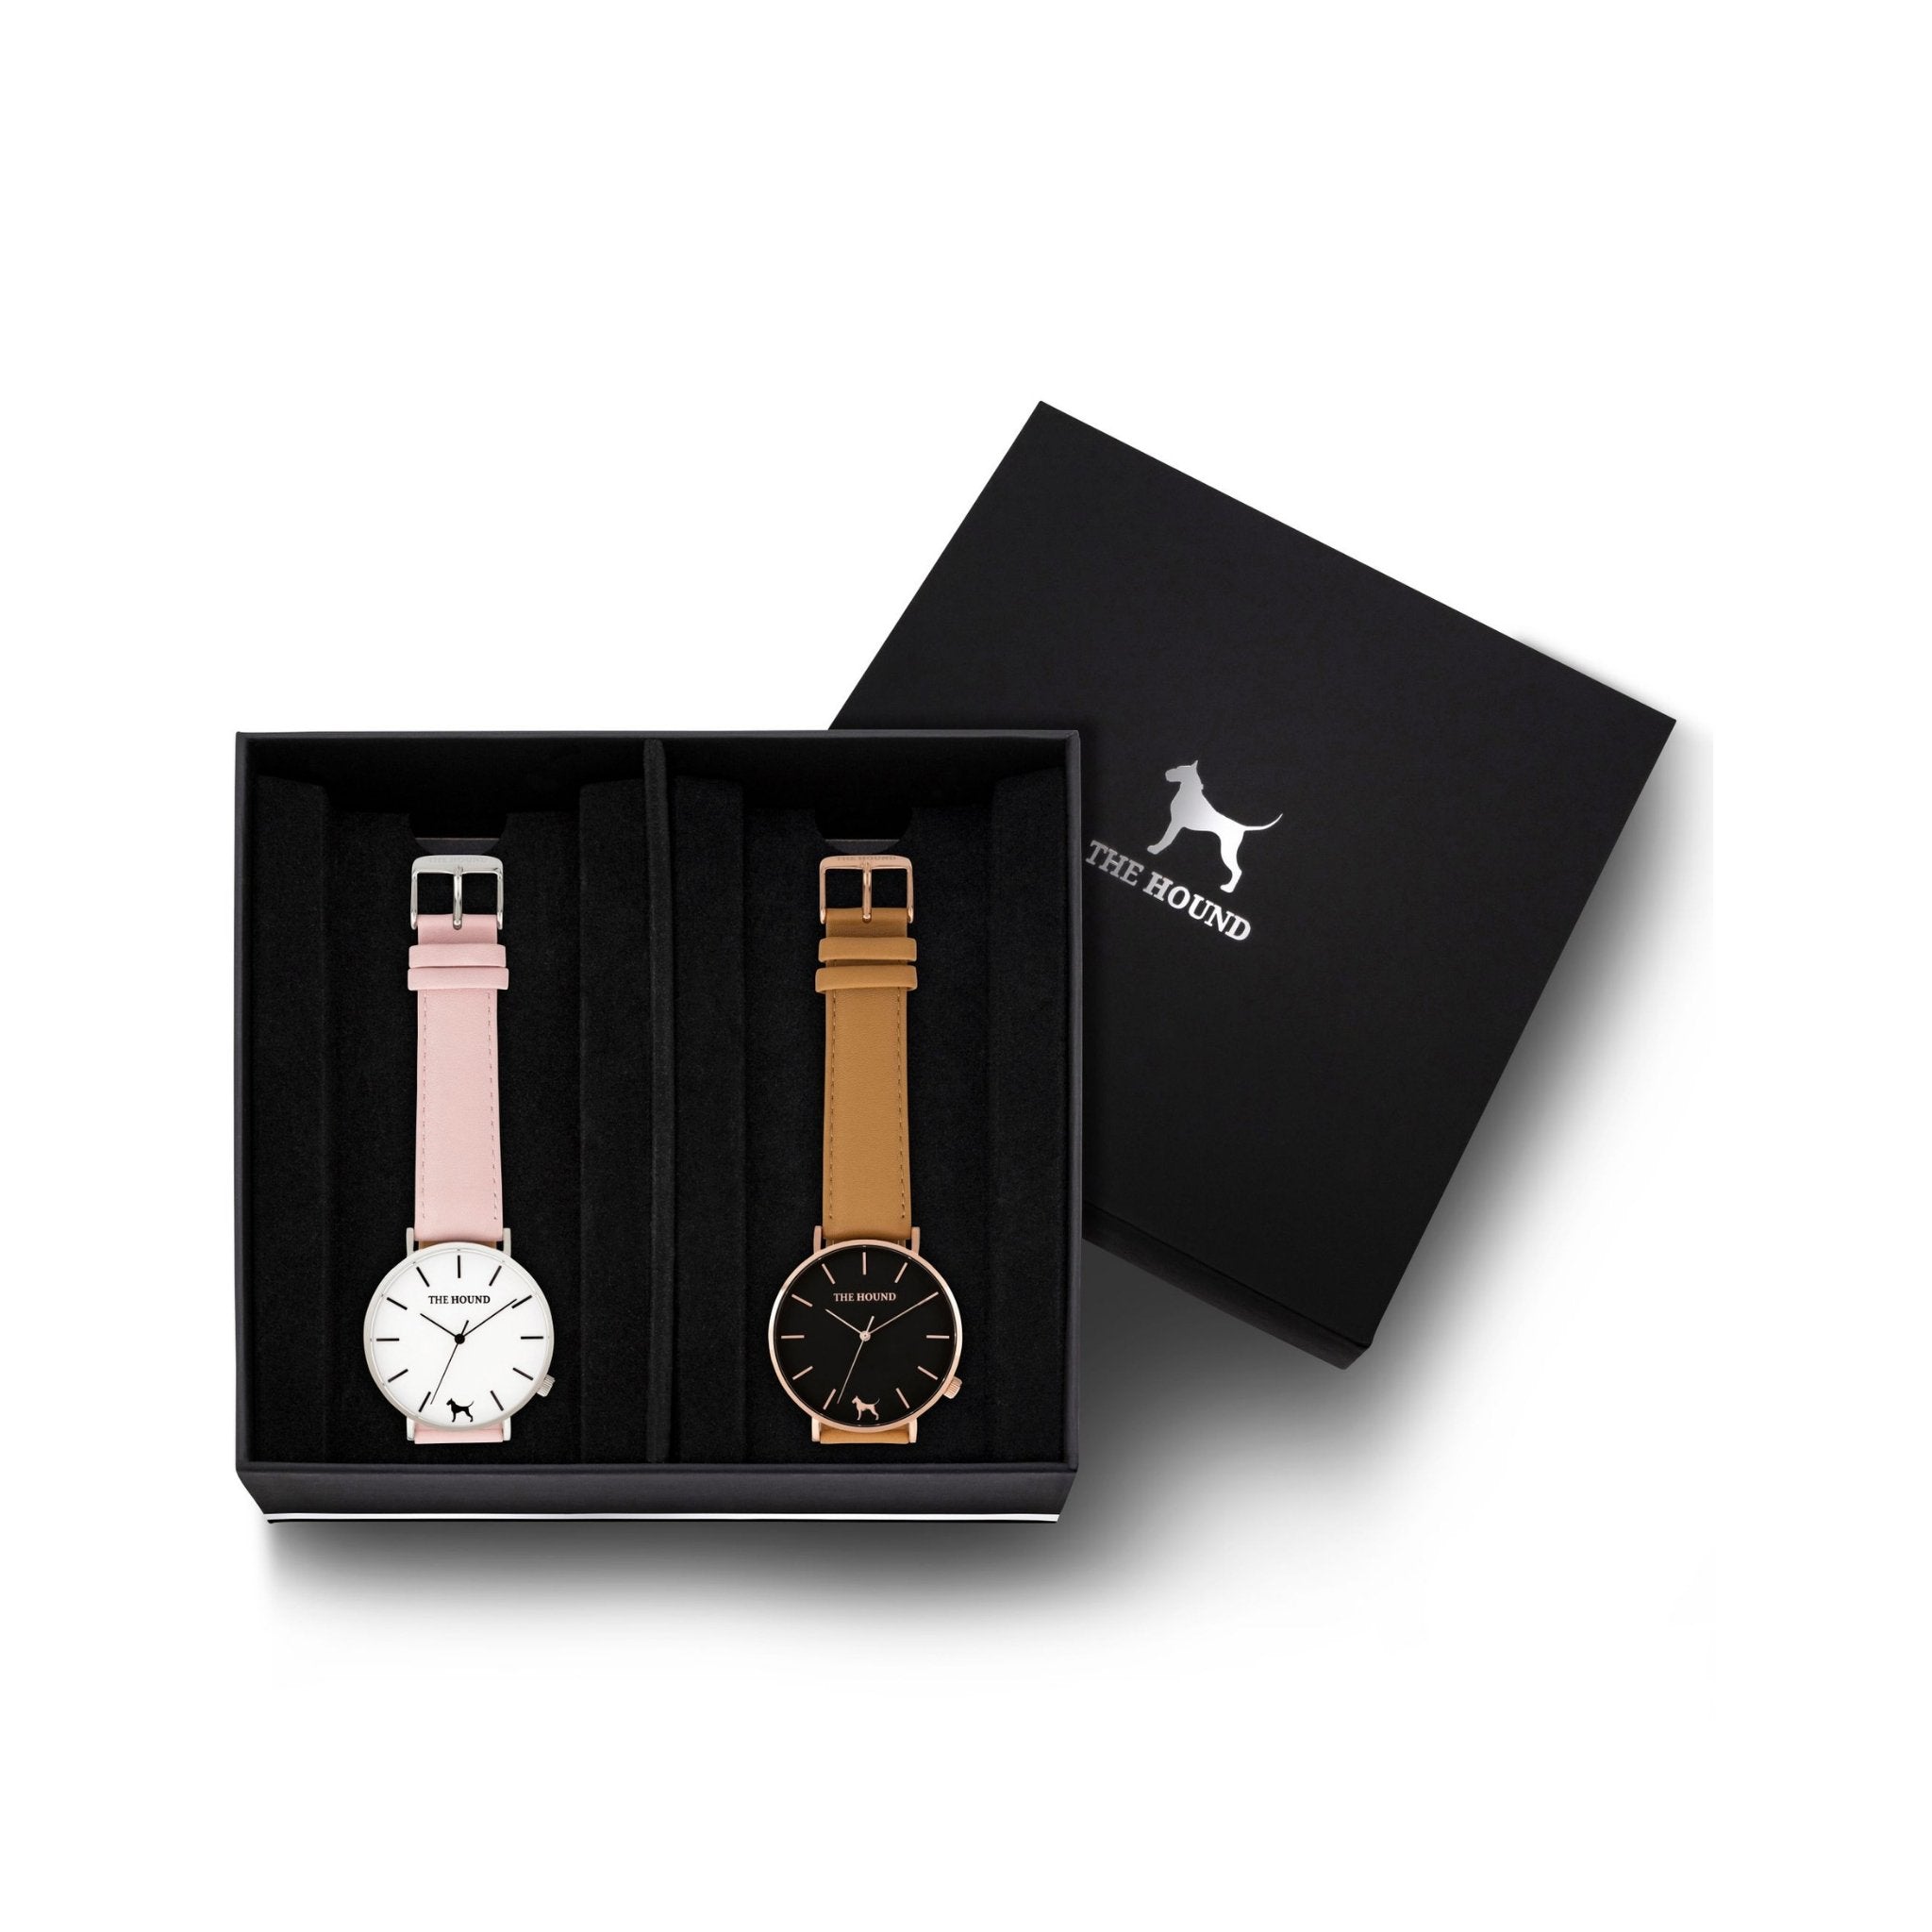 Custom gift set - Silver and white watch with stitched blush pink genuine leather band and a rose gold and black watch with stitched camel genuine leather band